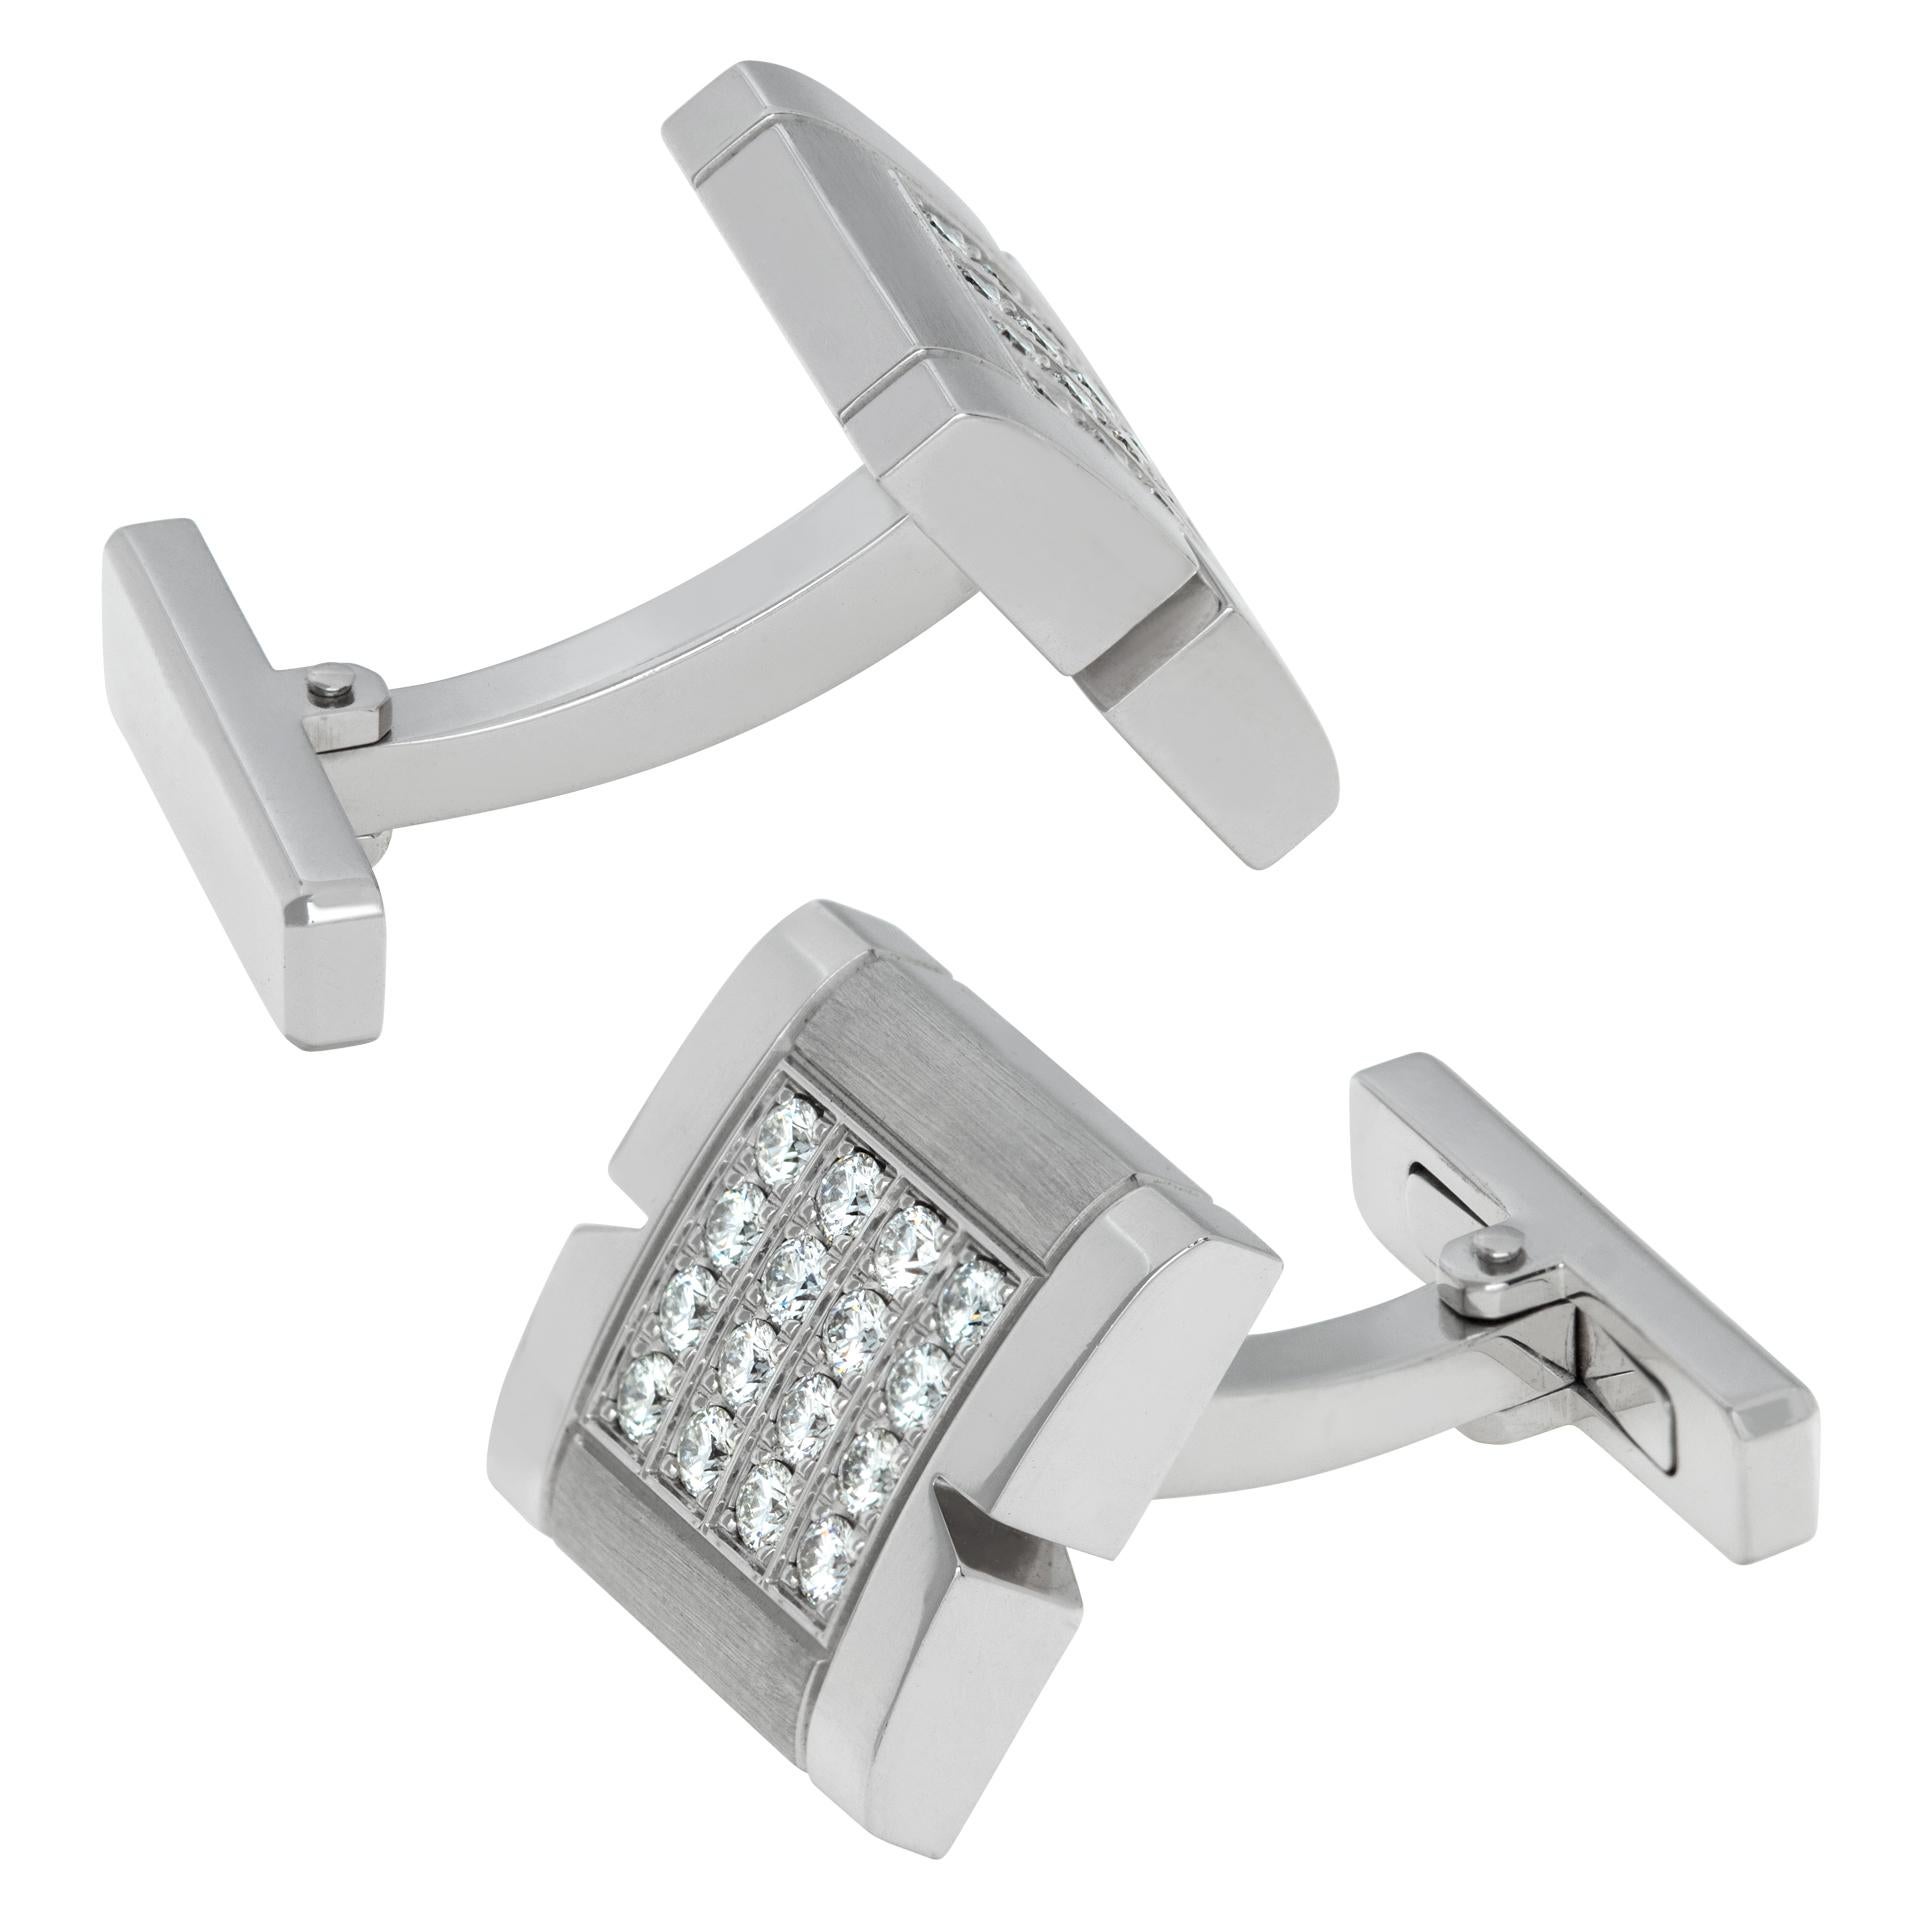 Cartier Tank Francaise  cufflinks in 18k white gold with 0.54 carats in round brilliant cut F-G color, VVS clarity diamonds. With original Cartier box. Size  of the square 14mm x 12.5mm. Length 20.6mm.
